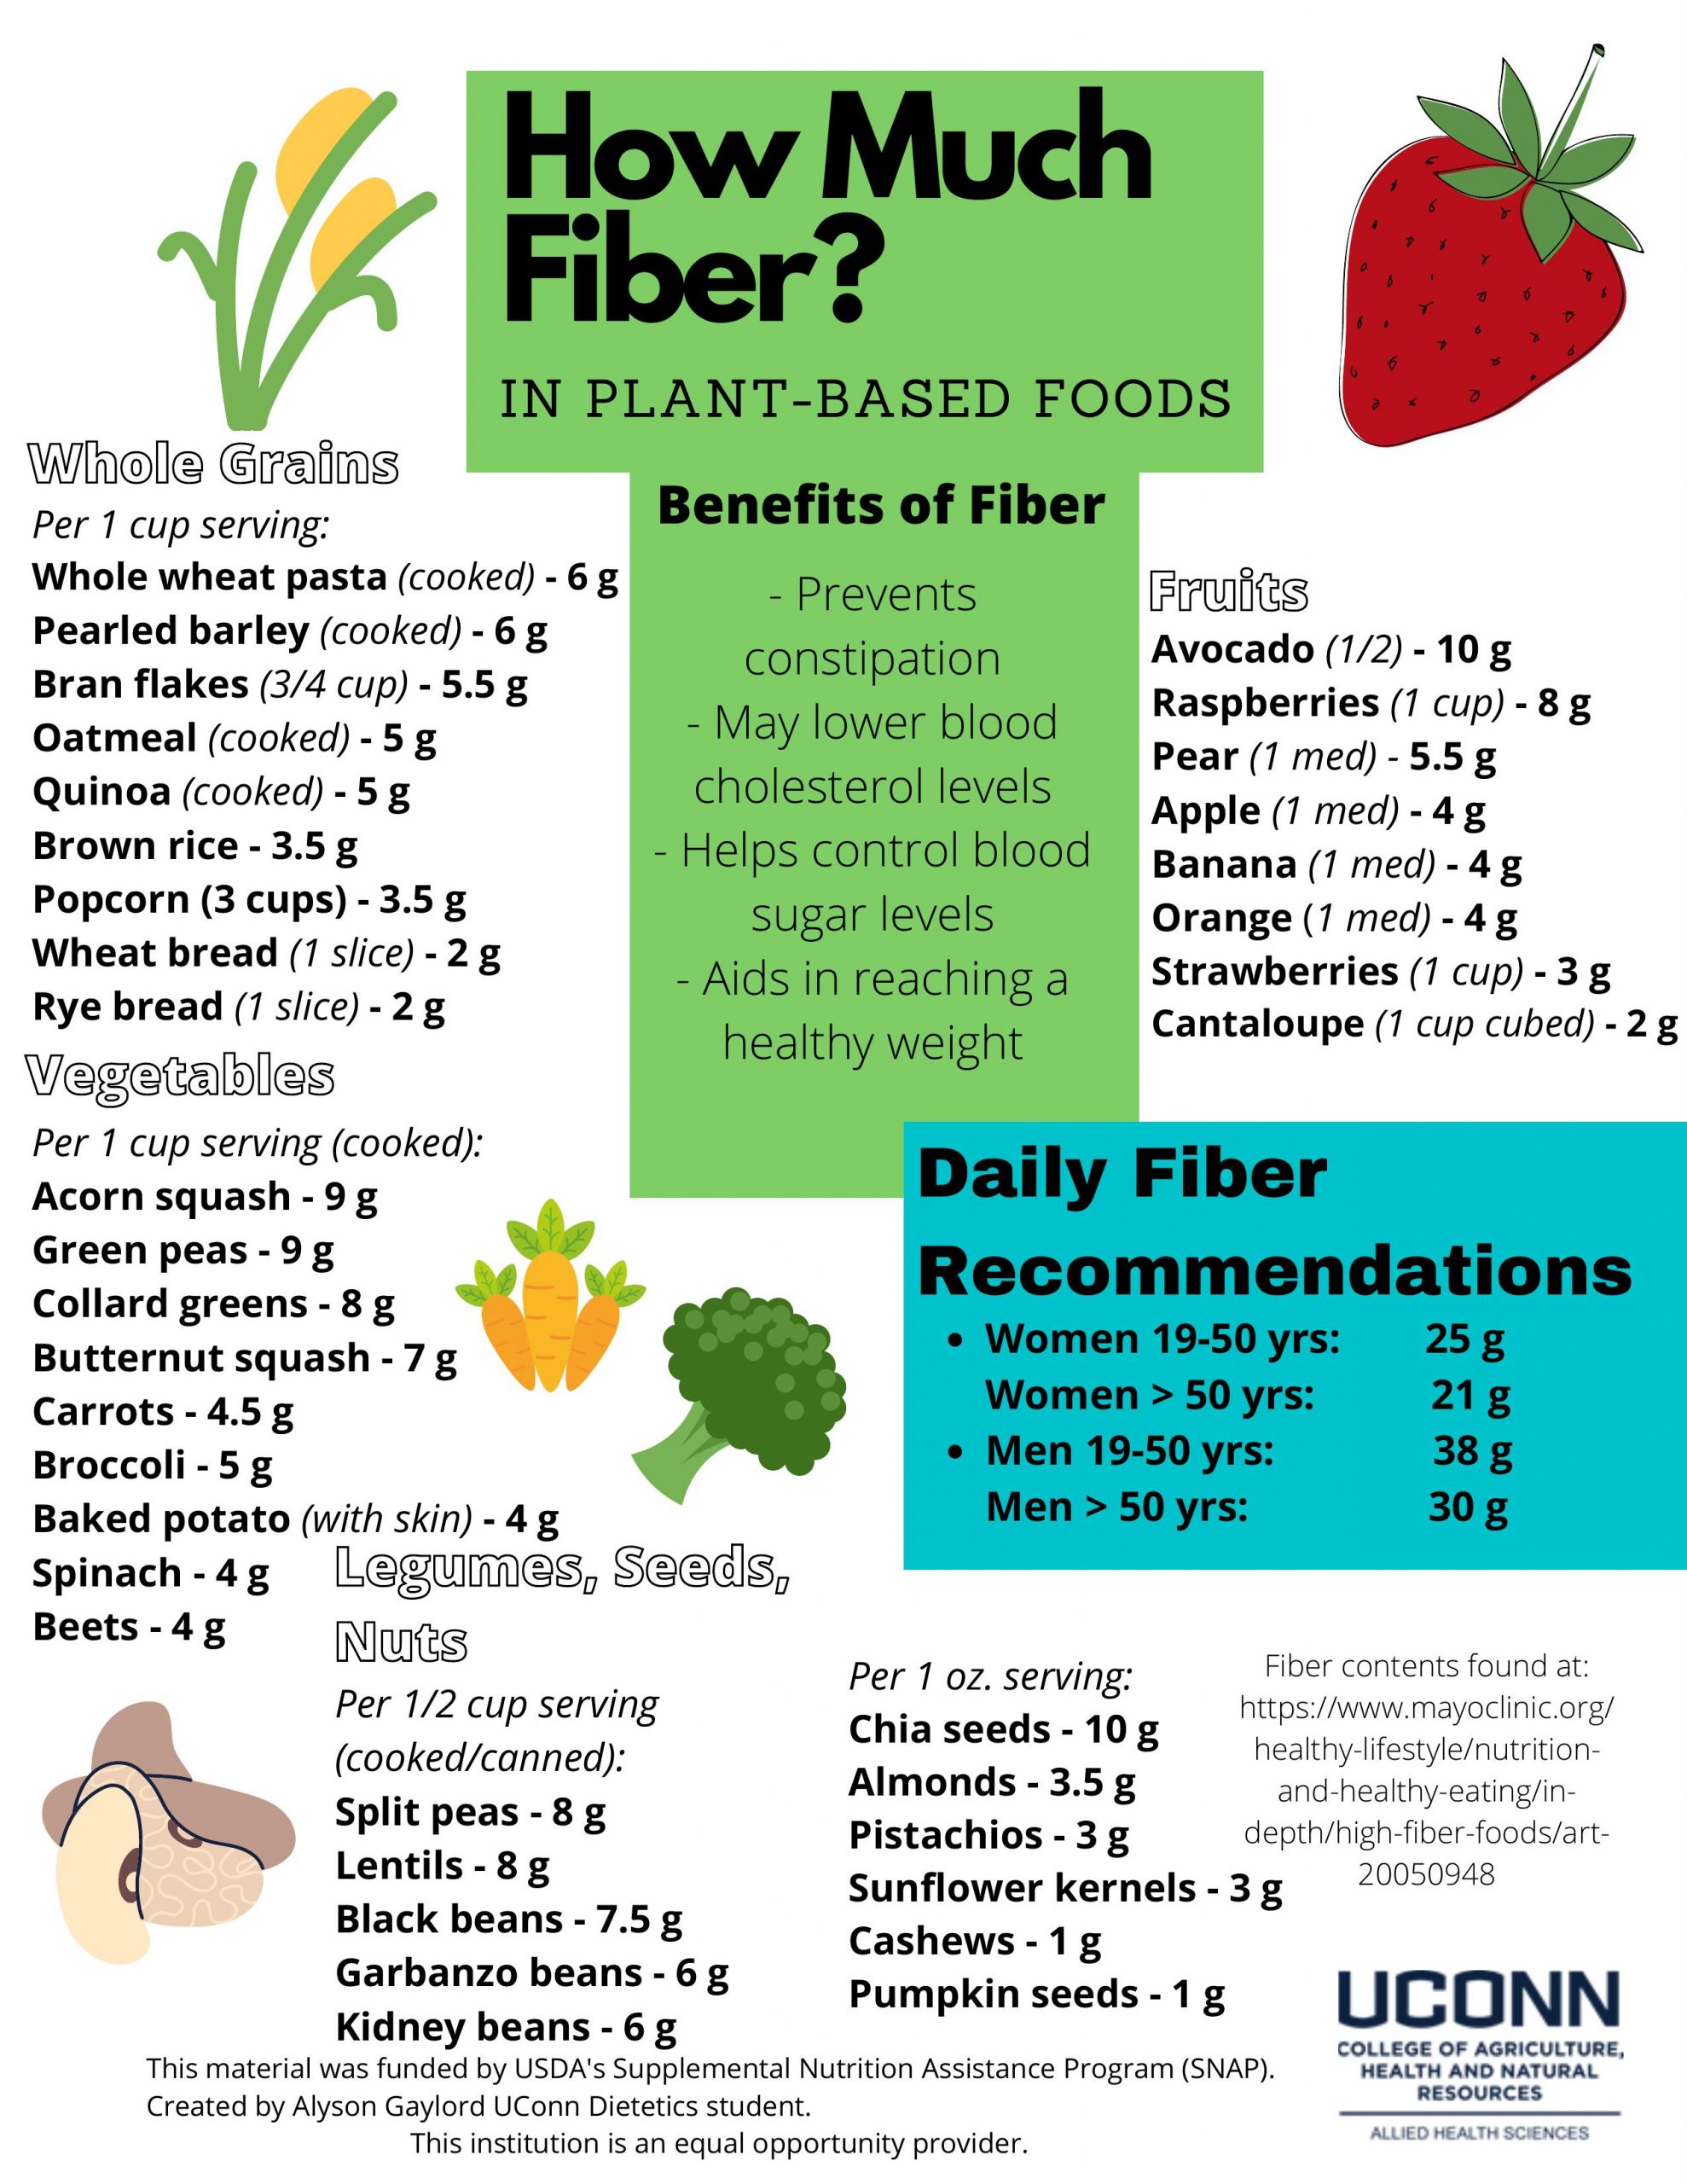 How Much Fiber in Plant-based Foods